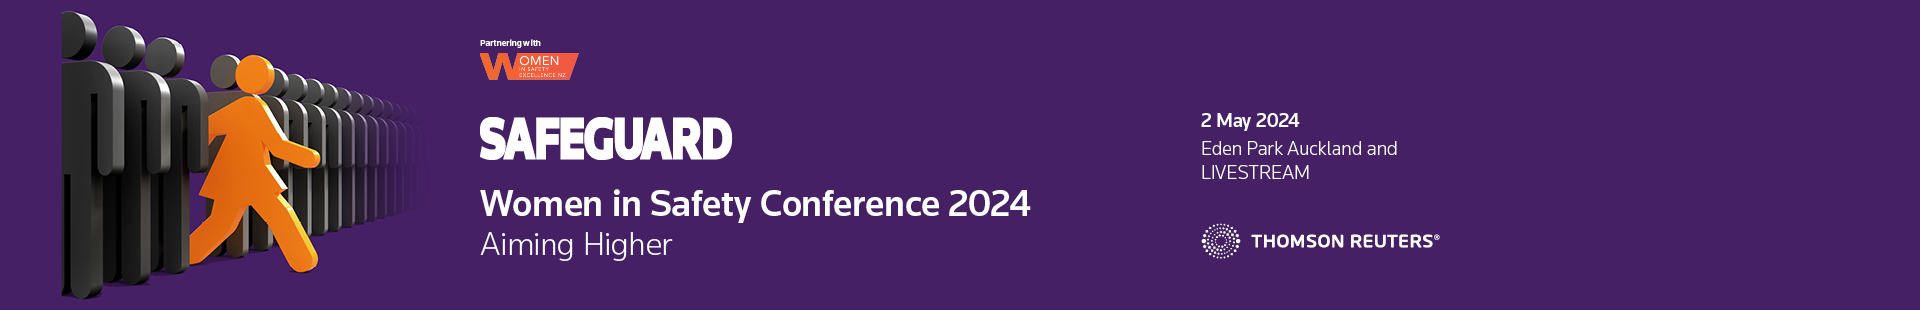 Women in Safety Conference 2024